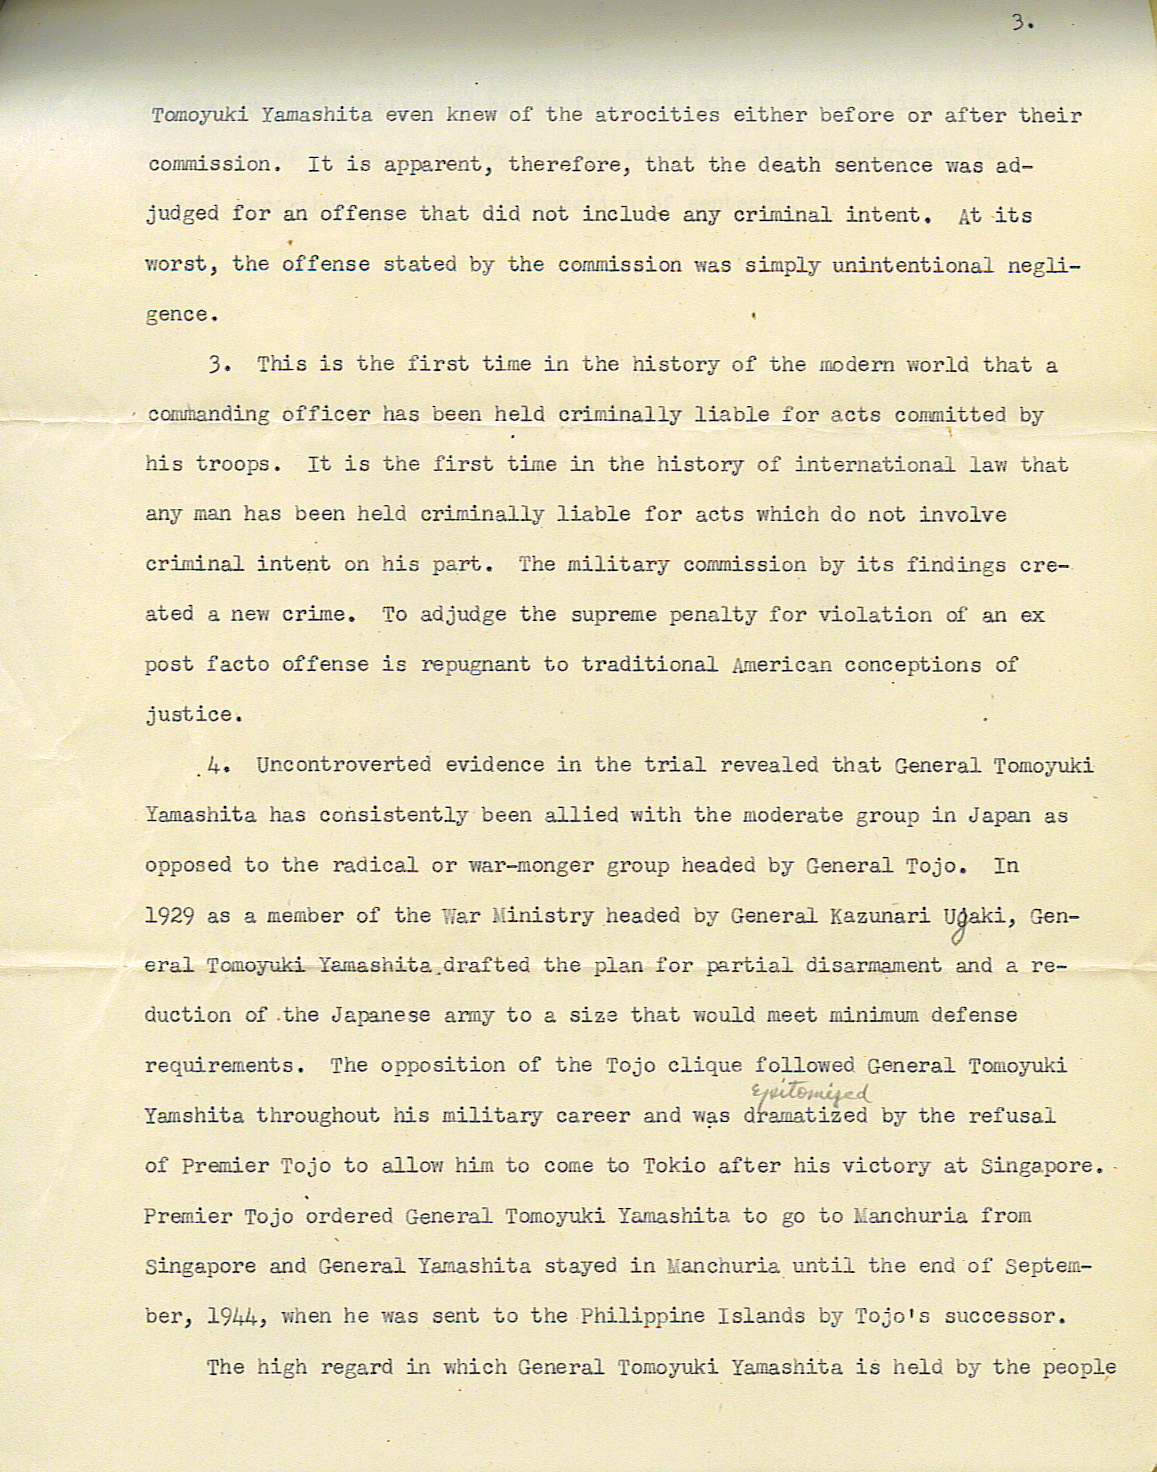 Request for Executive Clemency for Yamashita, addressed to Truman, 5 Feb 1946, page 3 of 4